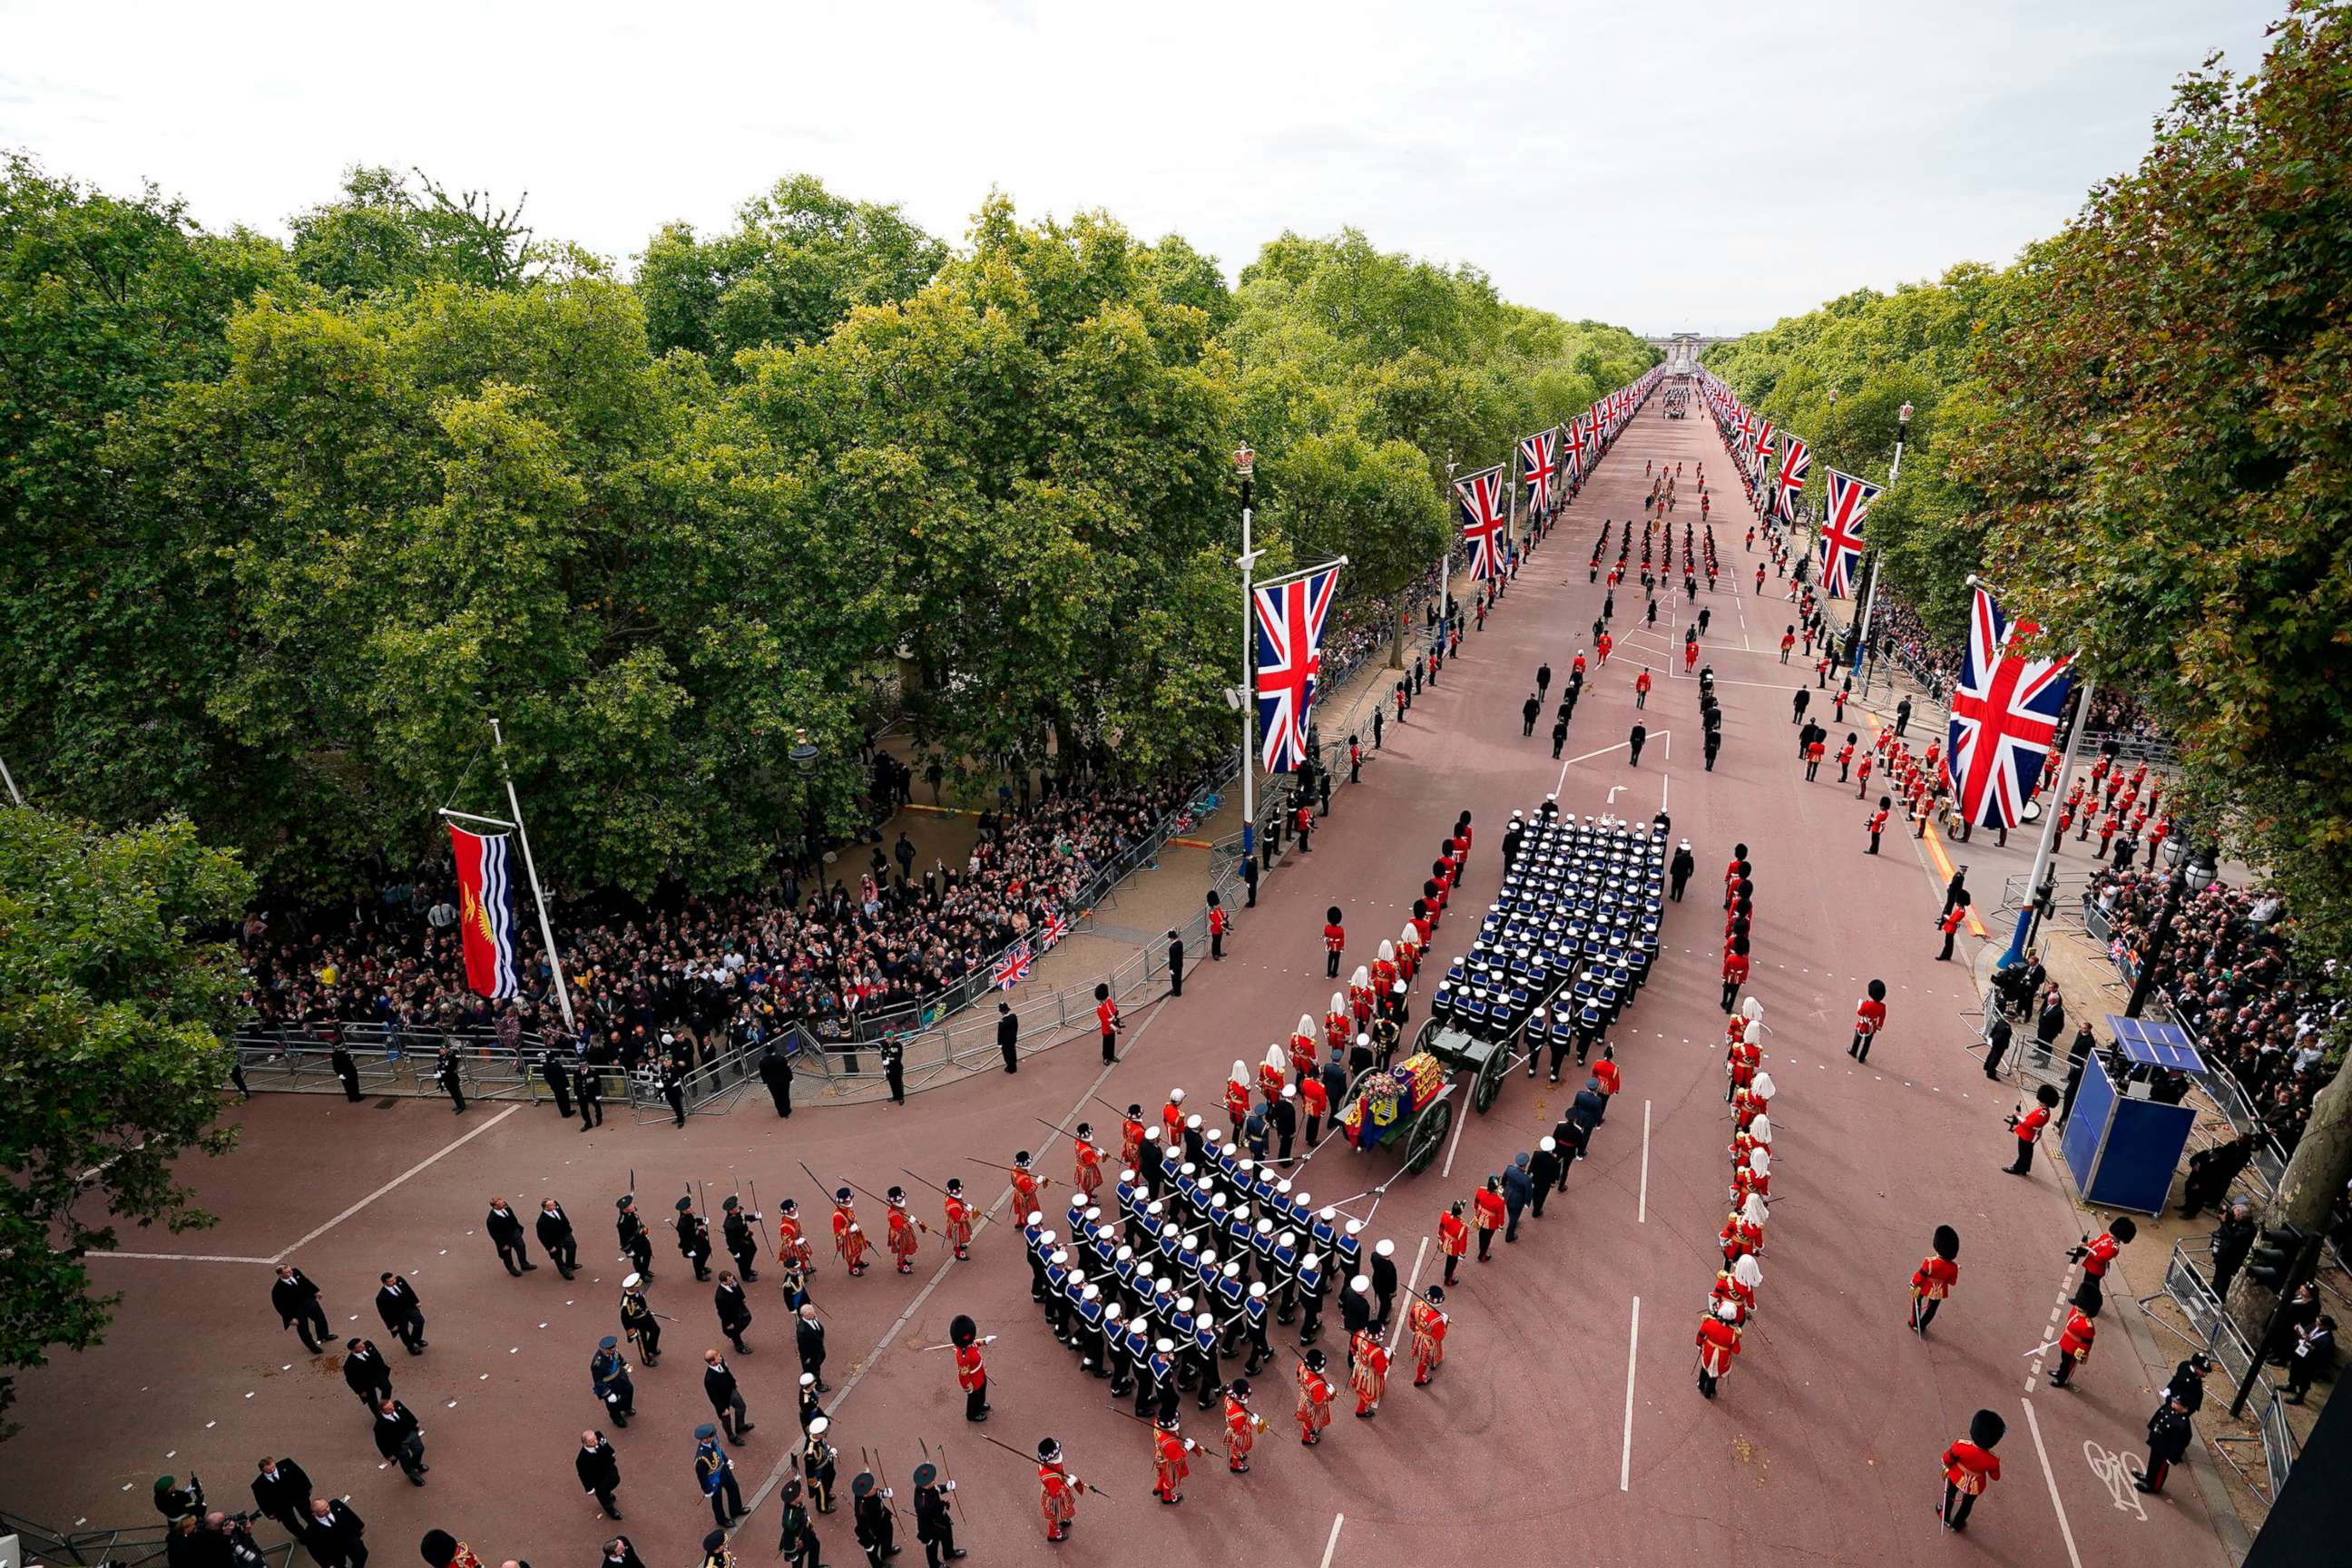 PHOTO: The funeral procession marches down The Mall following the service at Westminster Abbey, on the day of the state funeral and burial of Britain's Queen Elizabeth II, in London, Sept. 19, 2022.